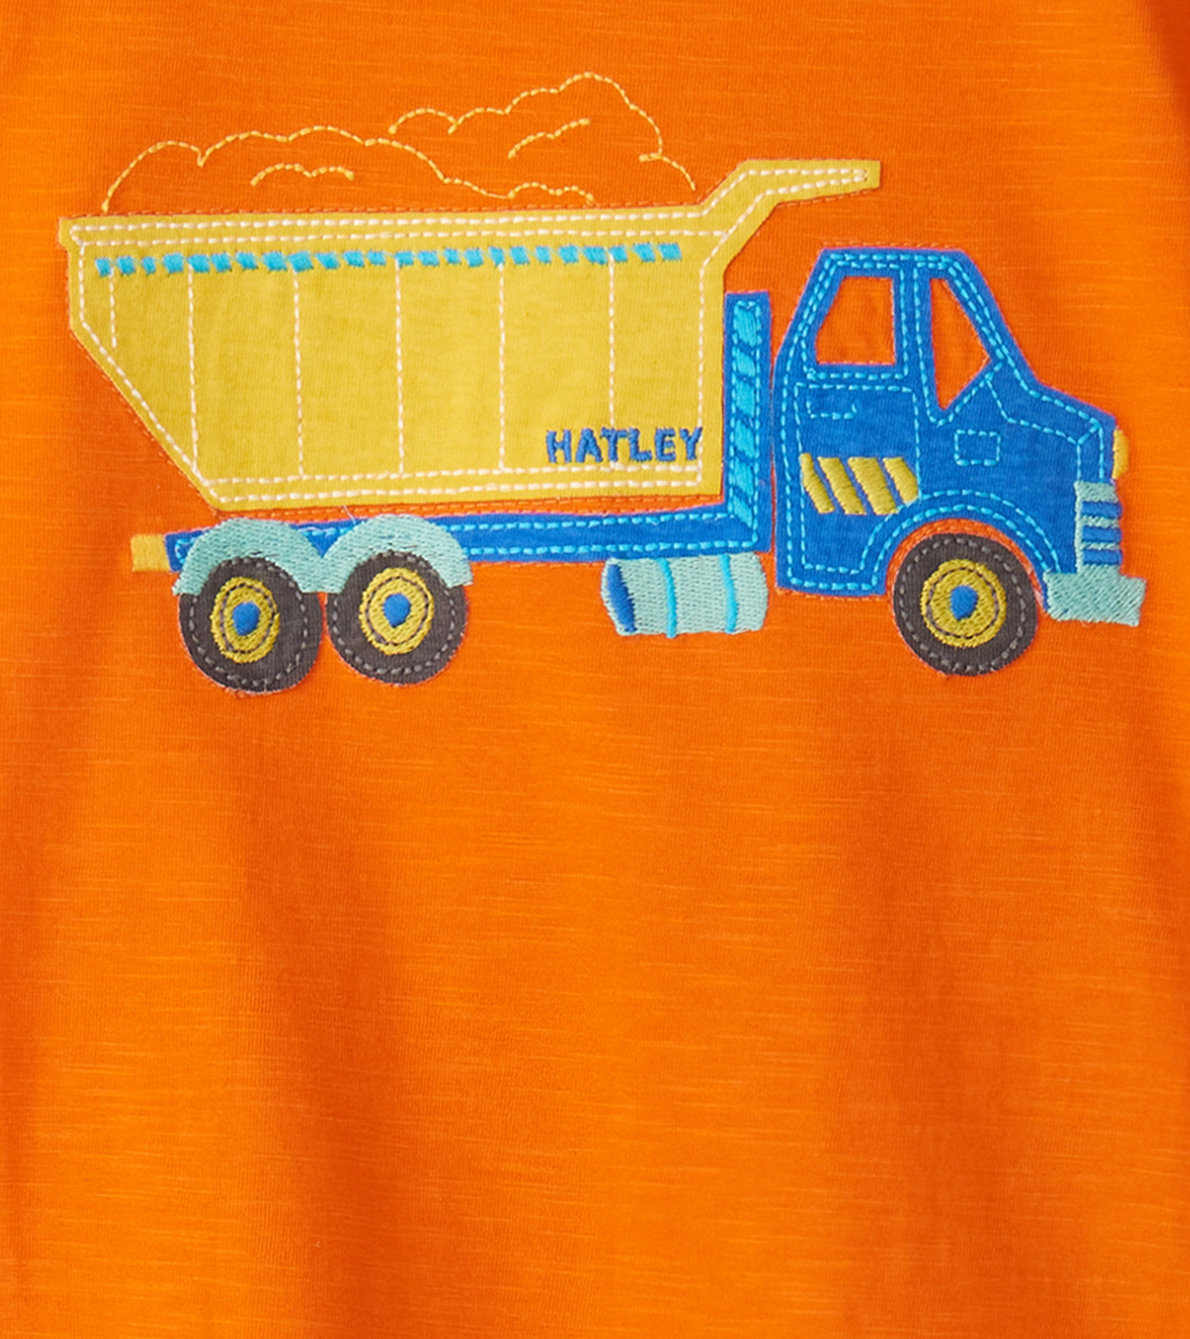 View larger image of Baby & Toddler Boys Dump Truck Graphic Tee